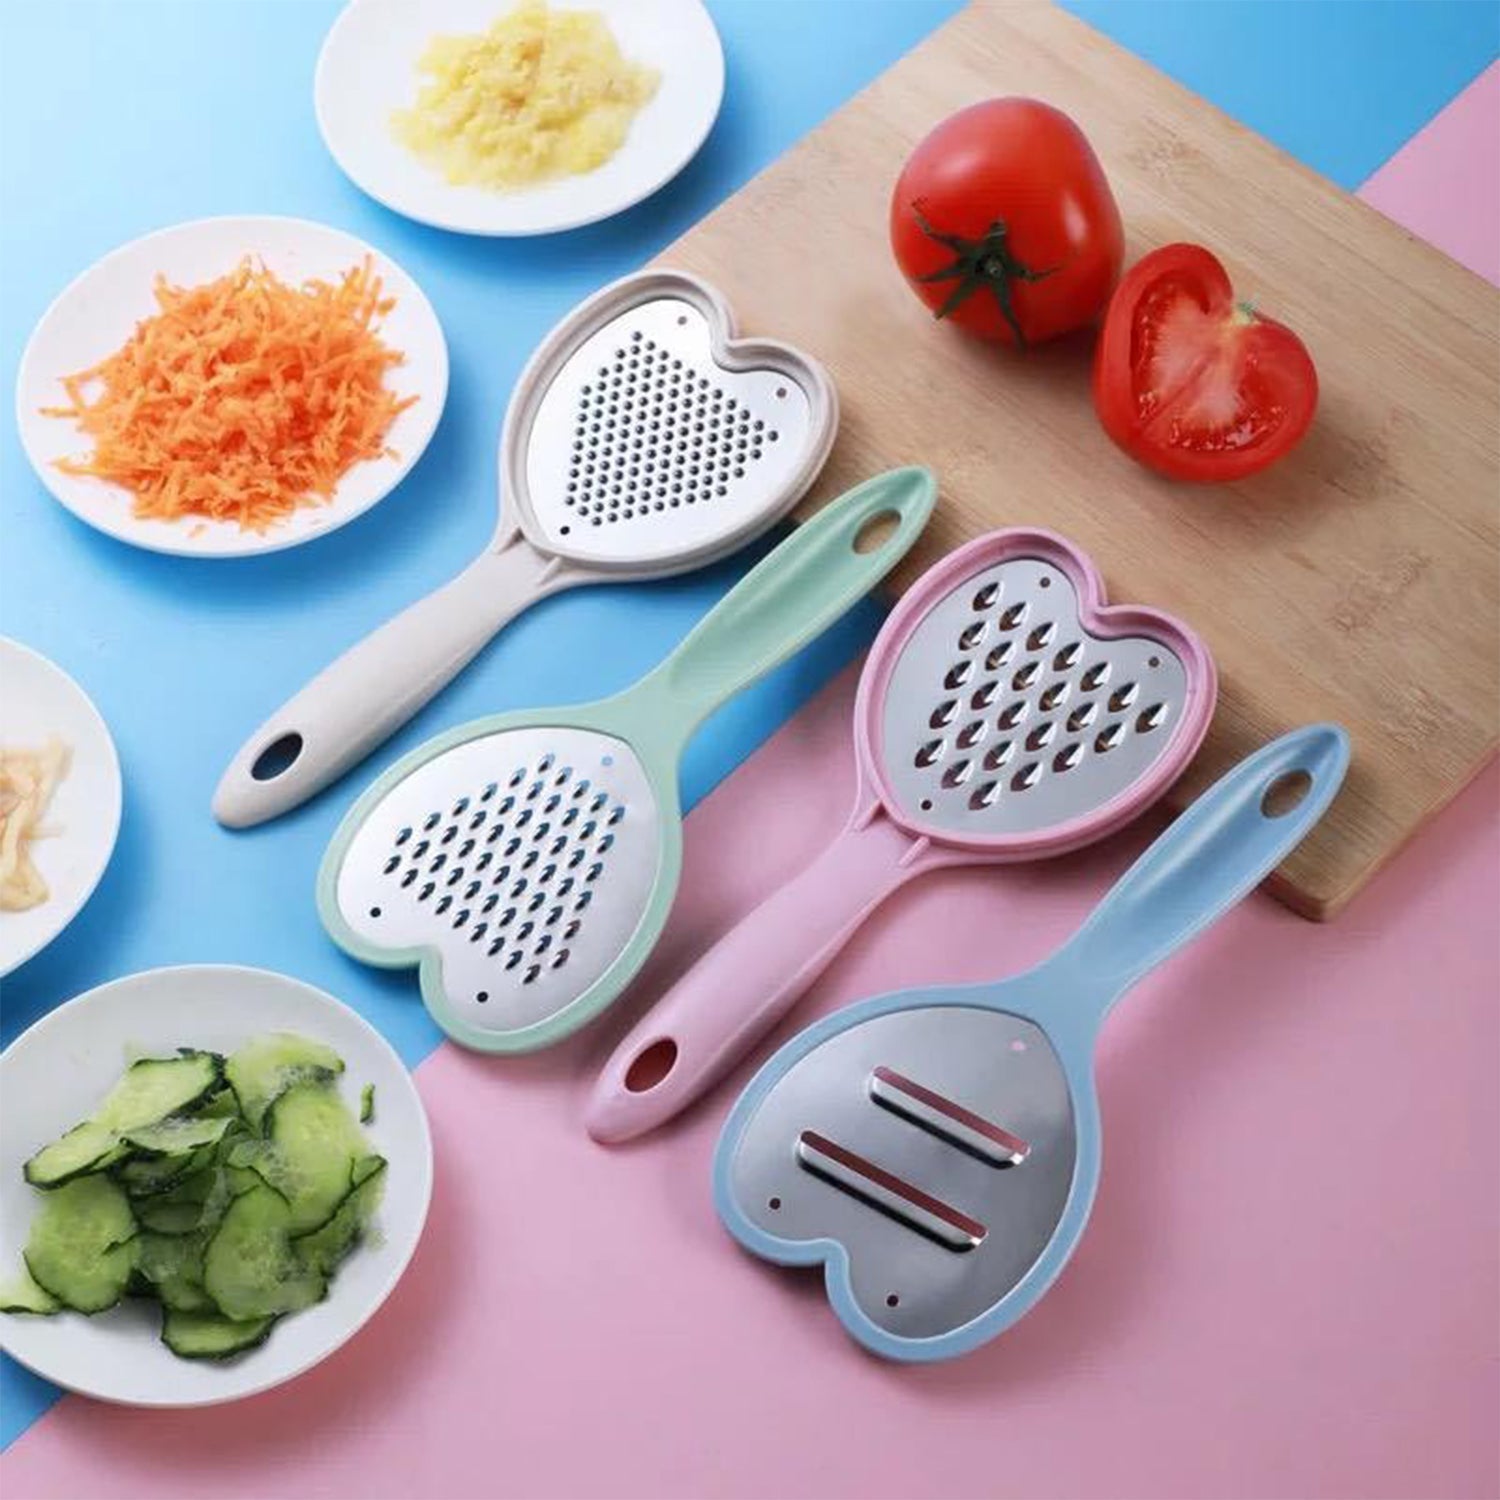 2587a Heart Grater Set and Heart Grater Slicer Used Widely for Grating and Slicing of Fruits, Vegetables, Cheese Etc. Including All Kitchen Purposes. DeoDap